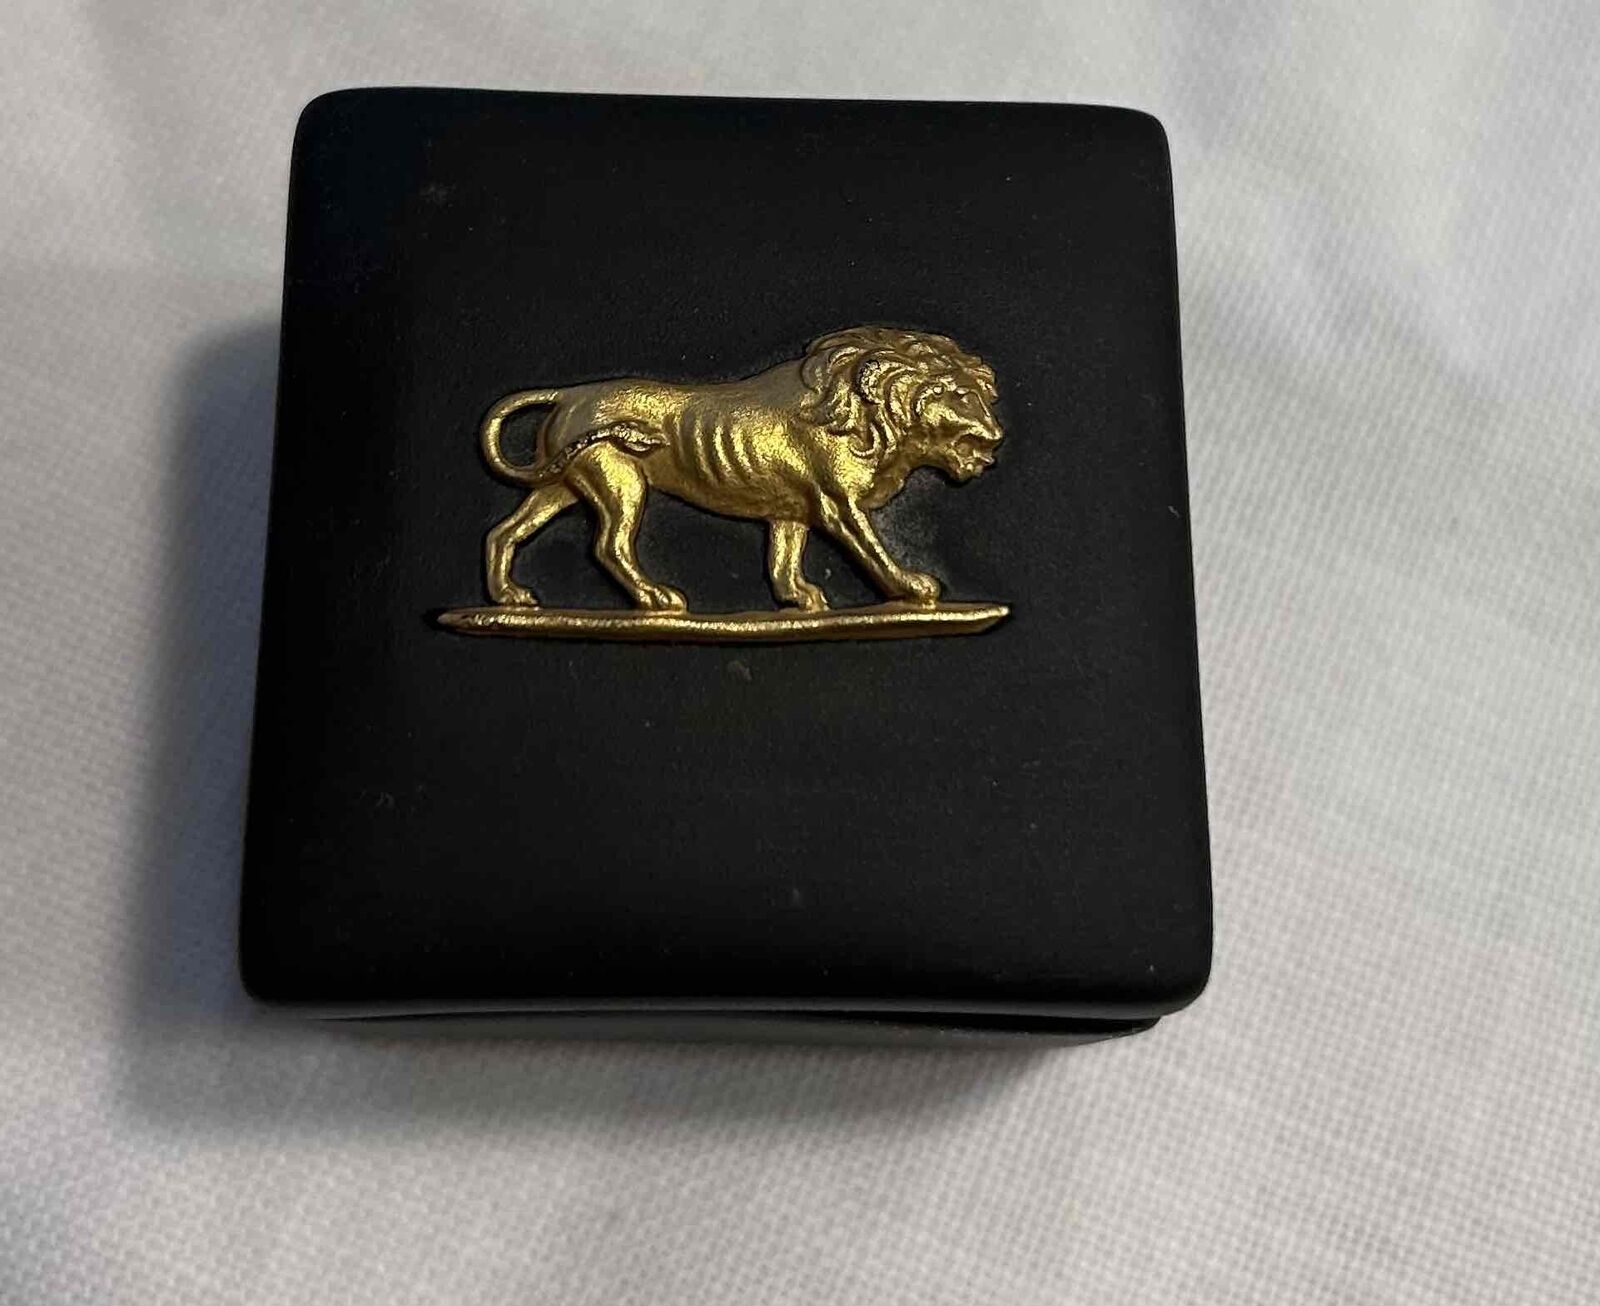 Wedgwood Black Basalt Small Gold Egyptian Lion Emblem Collectors Society Limited